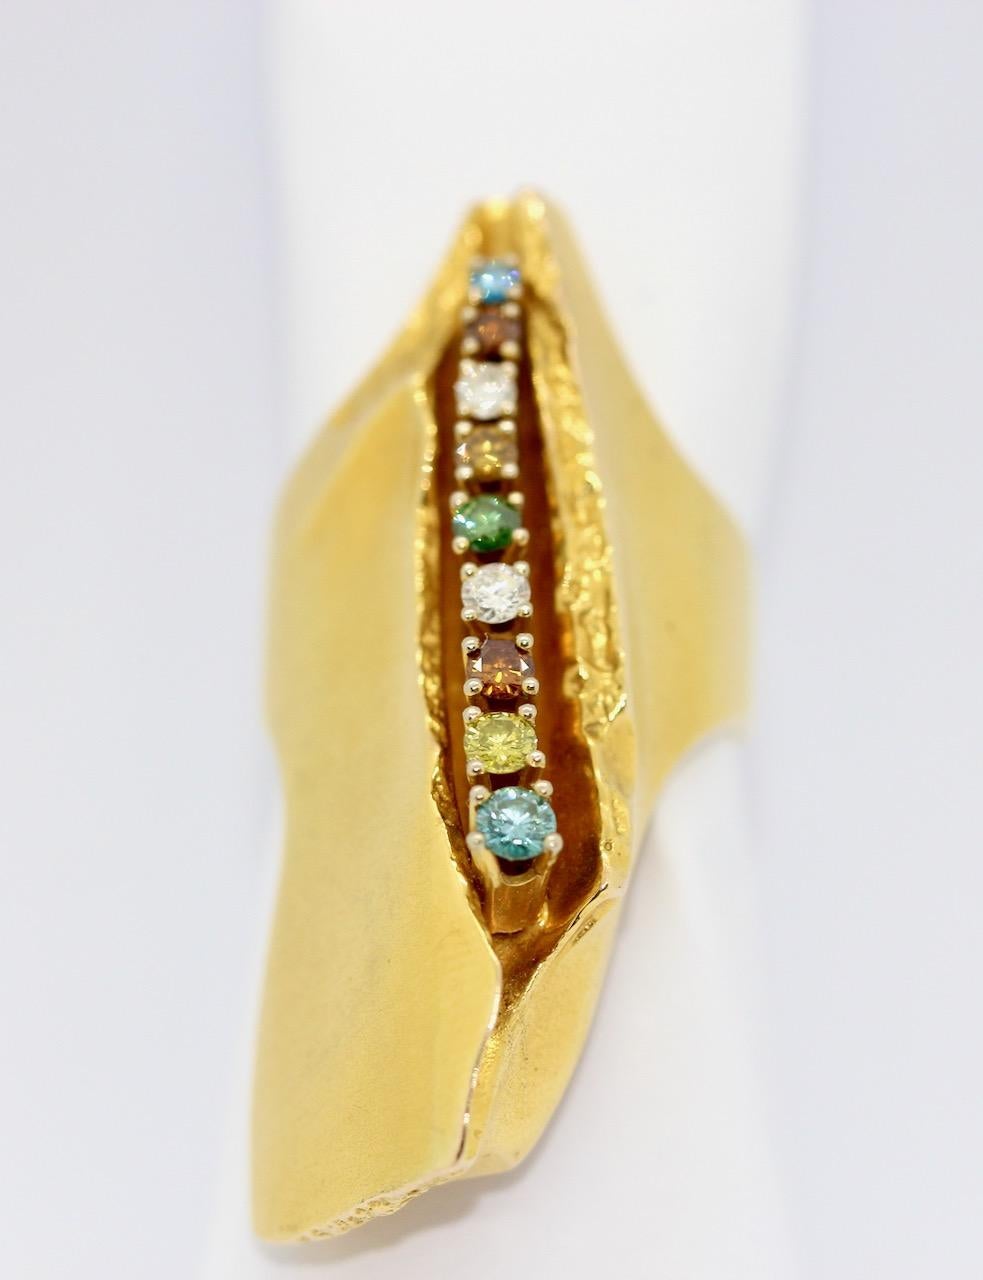 Large, solid designer multi-stone ring by Lapponia, design Björn Weckström, 14k gold.

Set with diamonds and various precious stones. Around 1976.
Hallmarked. Year code Y7.

Length: 47mm; Width: 21.6mm

Includes certificate of authenticity.